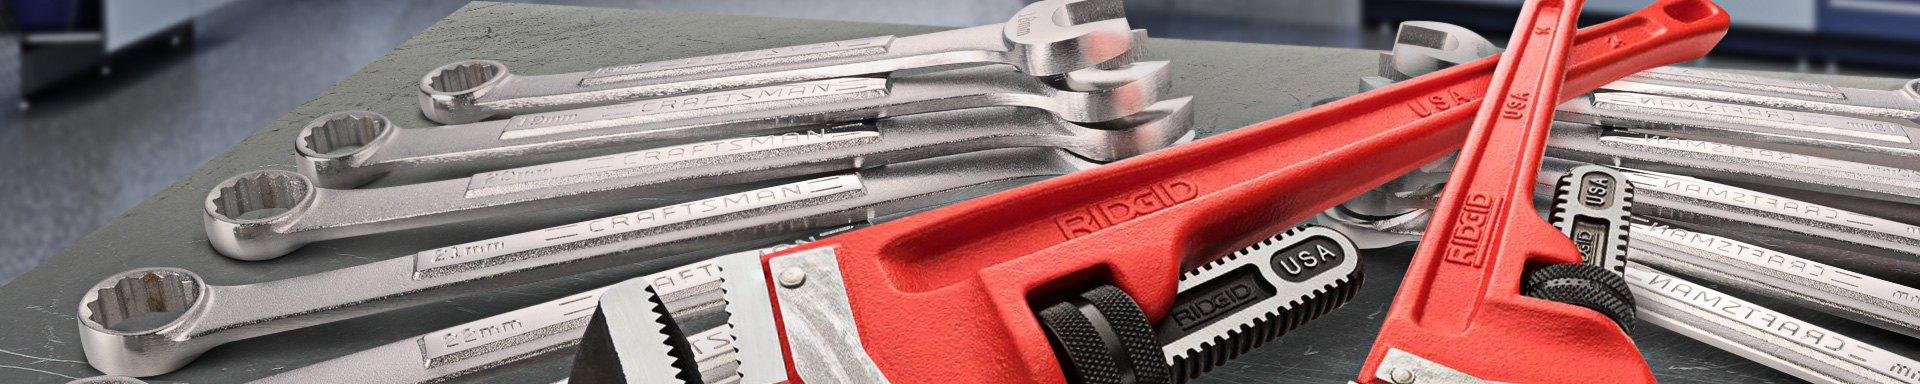 Spanner And Socket Set Buying Guide